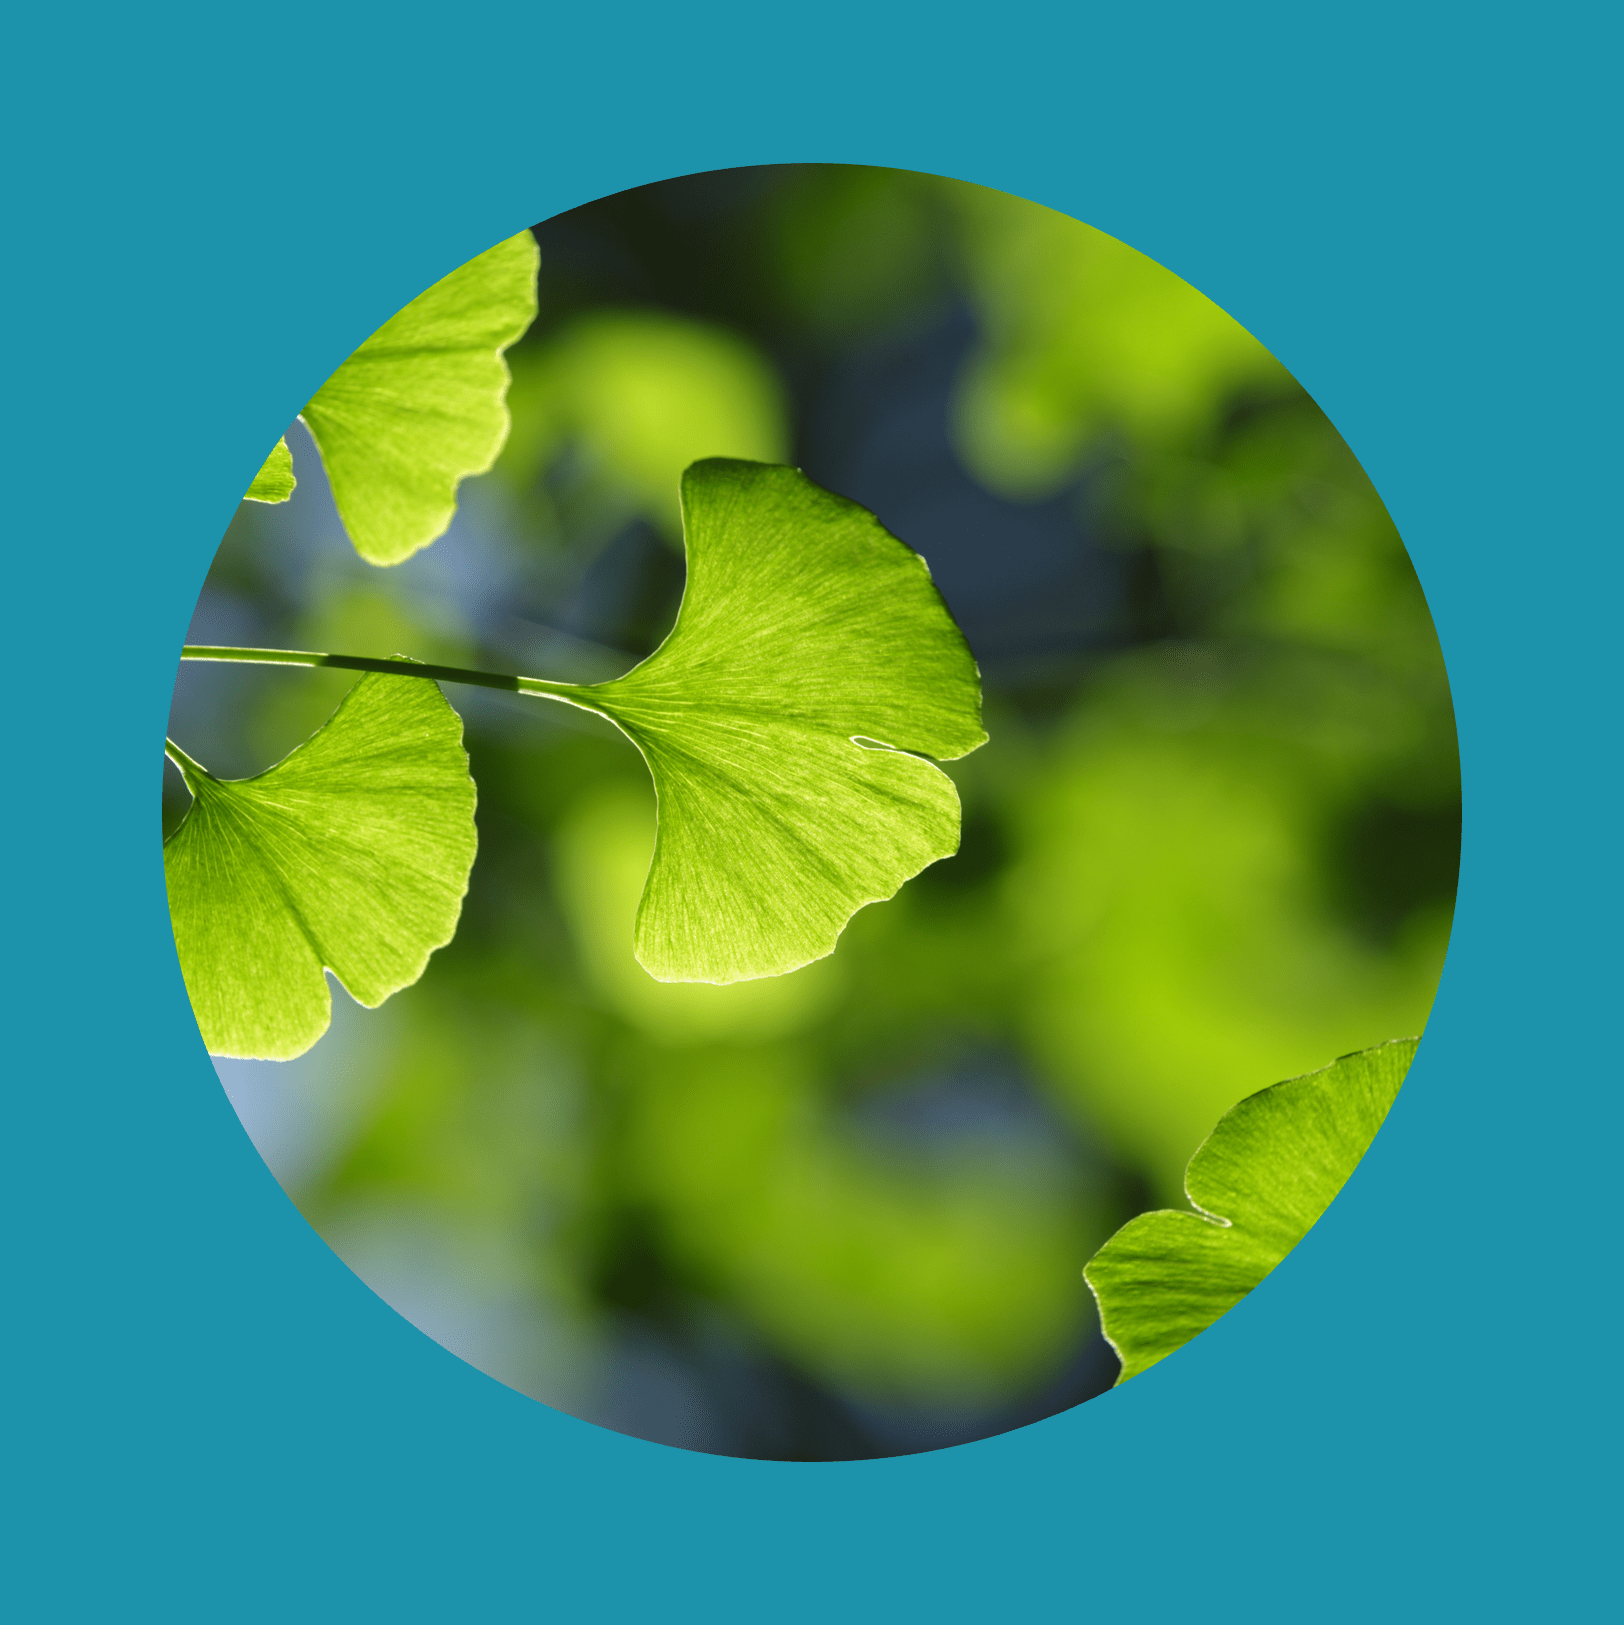 Ginkgo biloba tree. Green leaves of the in bright illumination with a blurred background